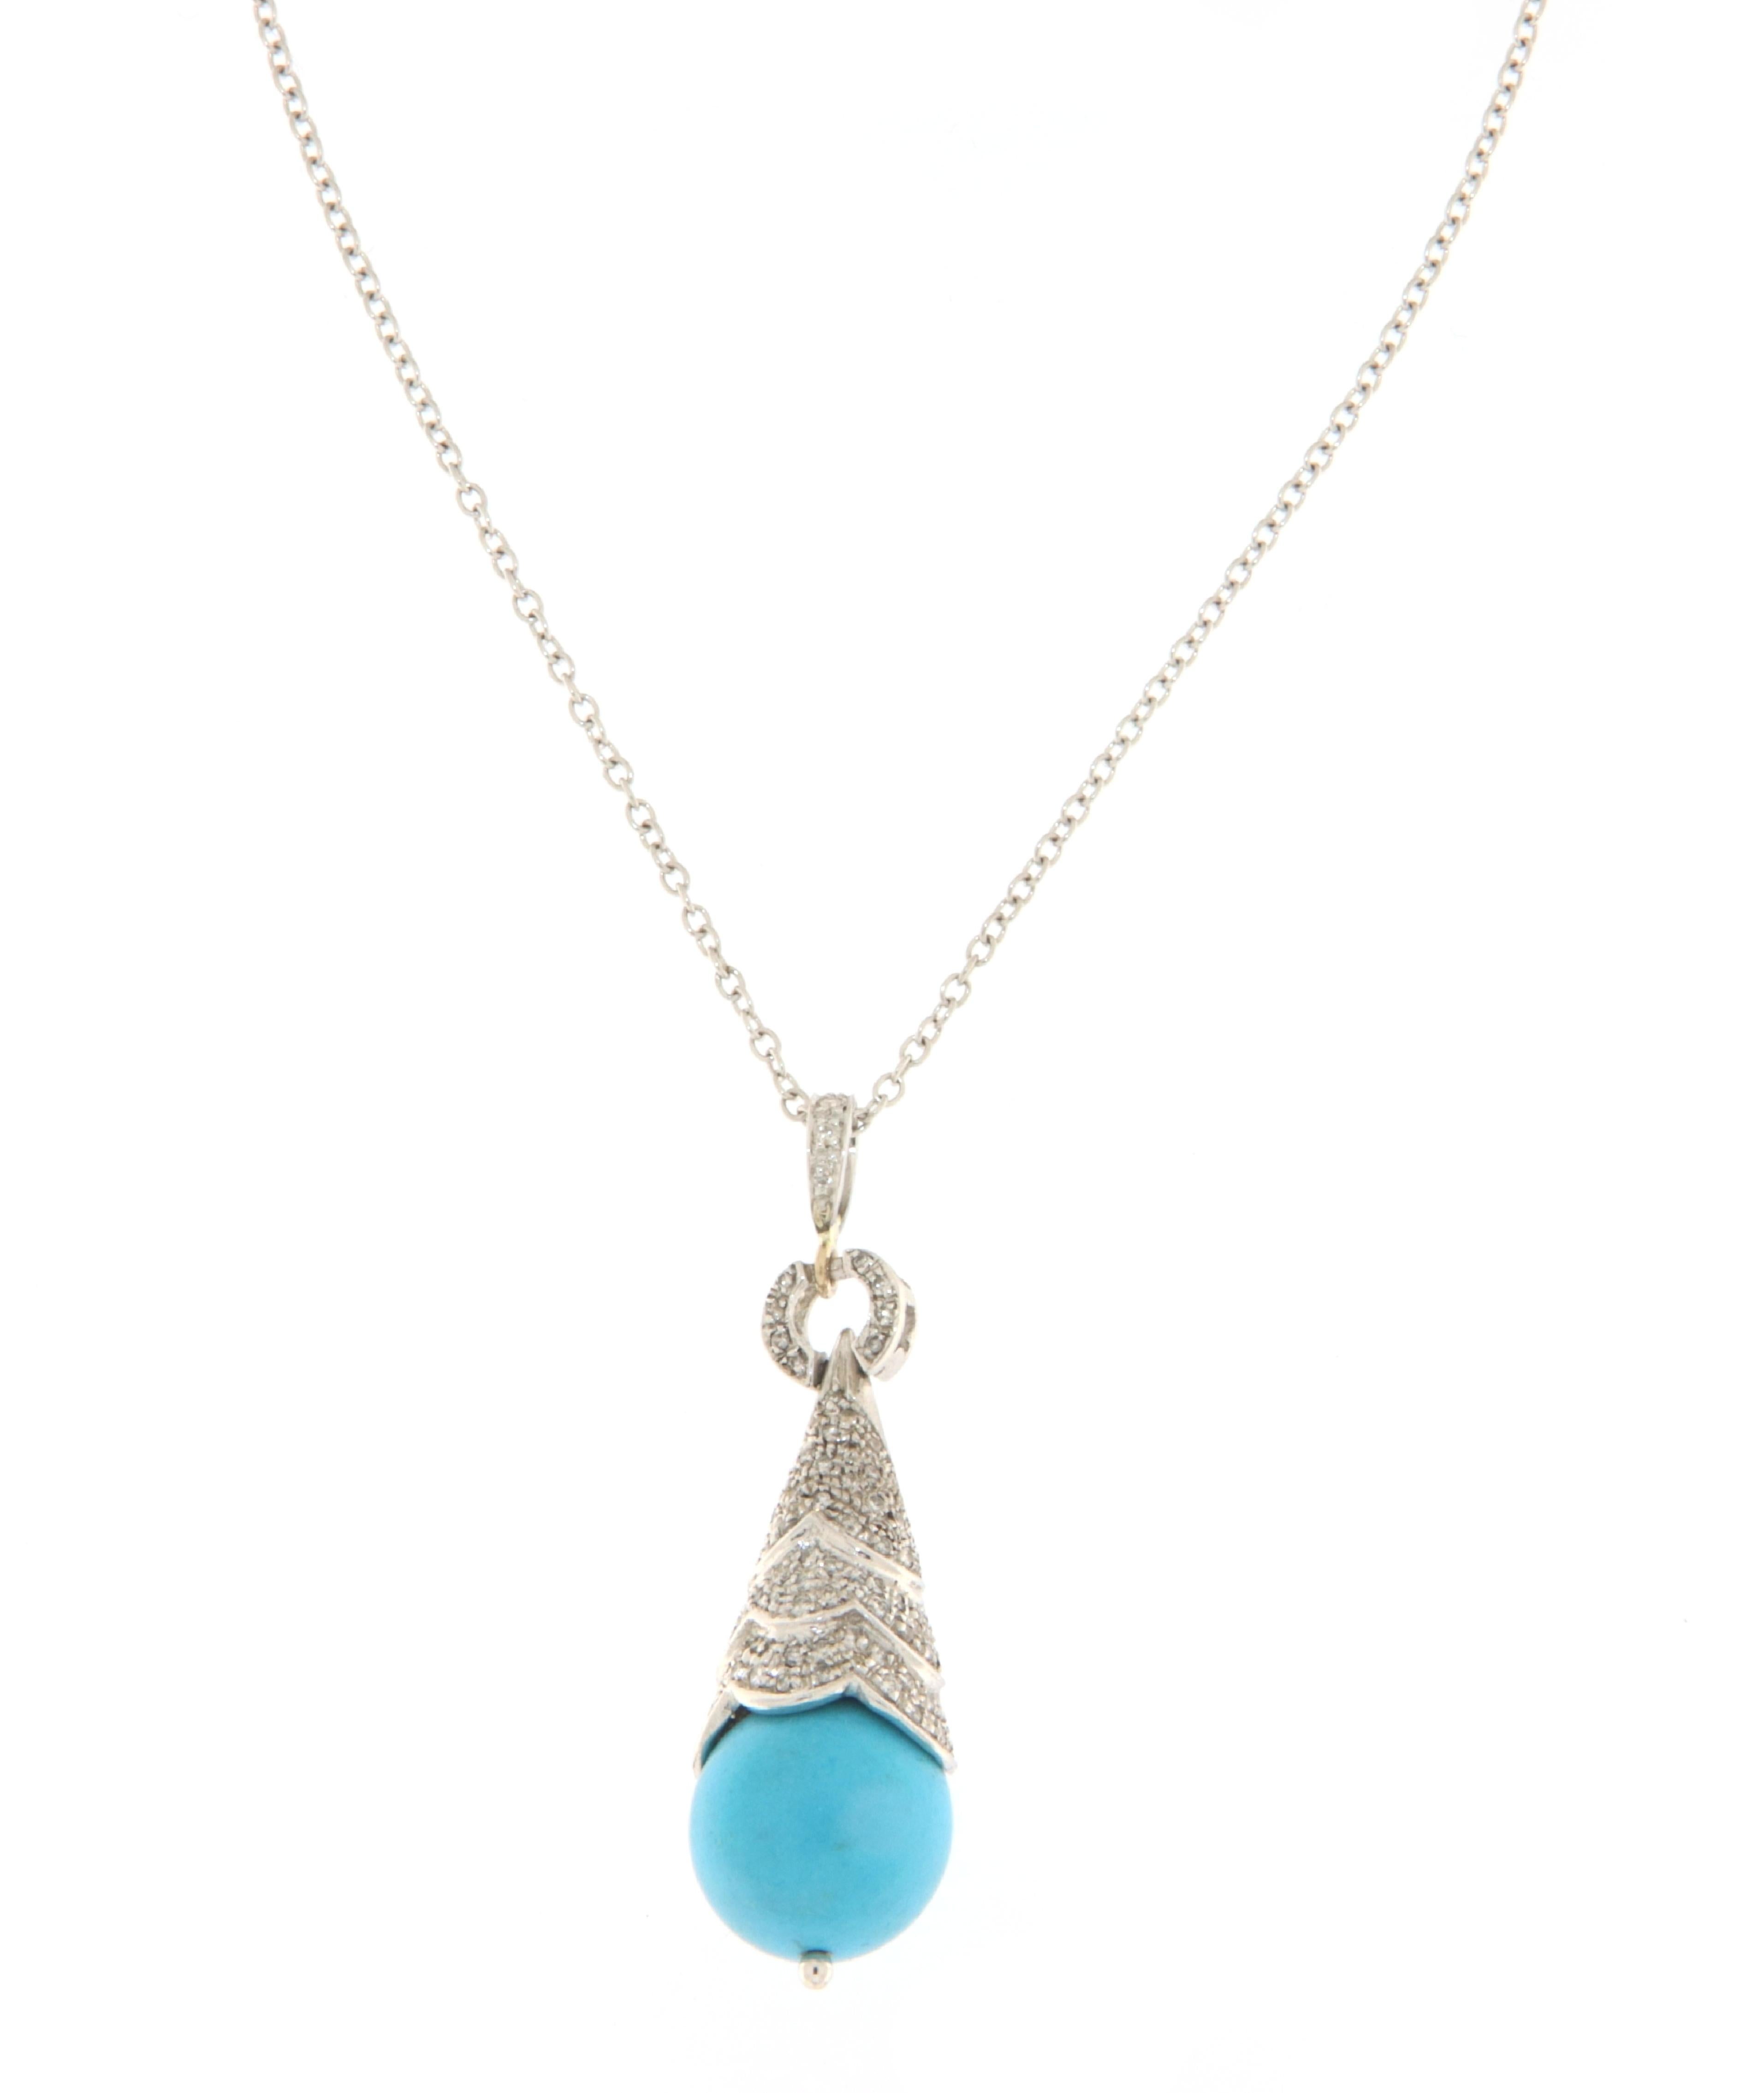 This elegant necklace is a statement piece fashioned from 18-karat white gold, featuring a pendant with a vibrant turquoise sphere that adds a pop of color and a touch of natural beauty. The turquoise is complemented by a generous scattering of